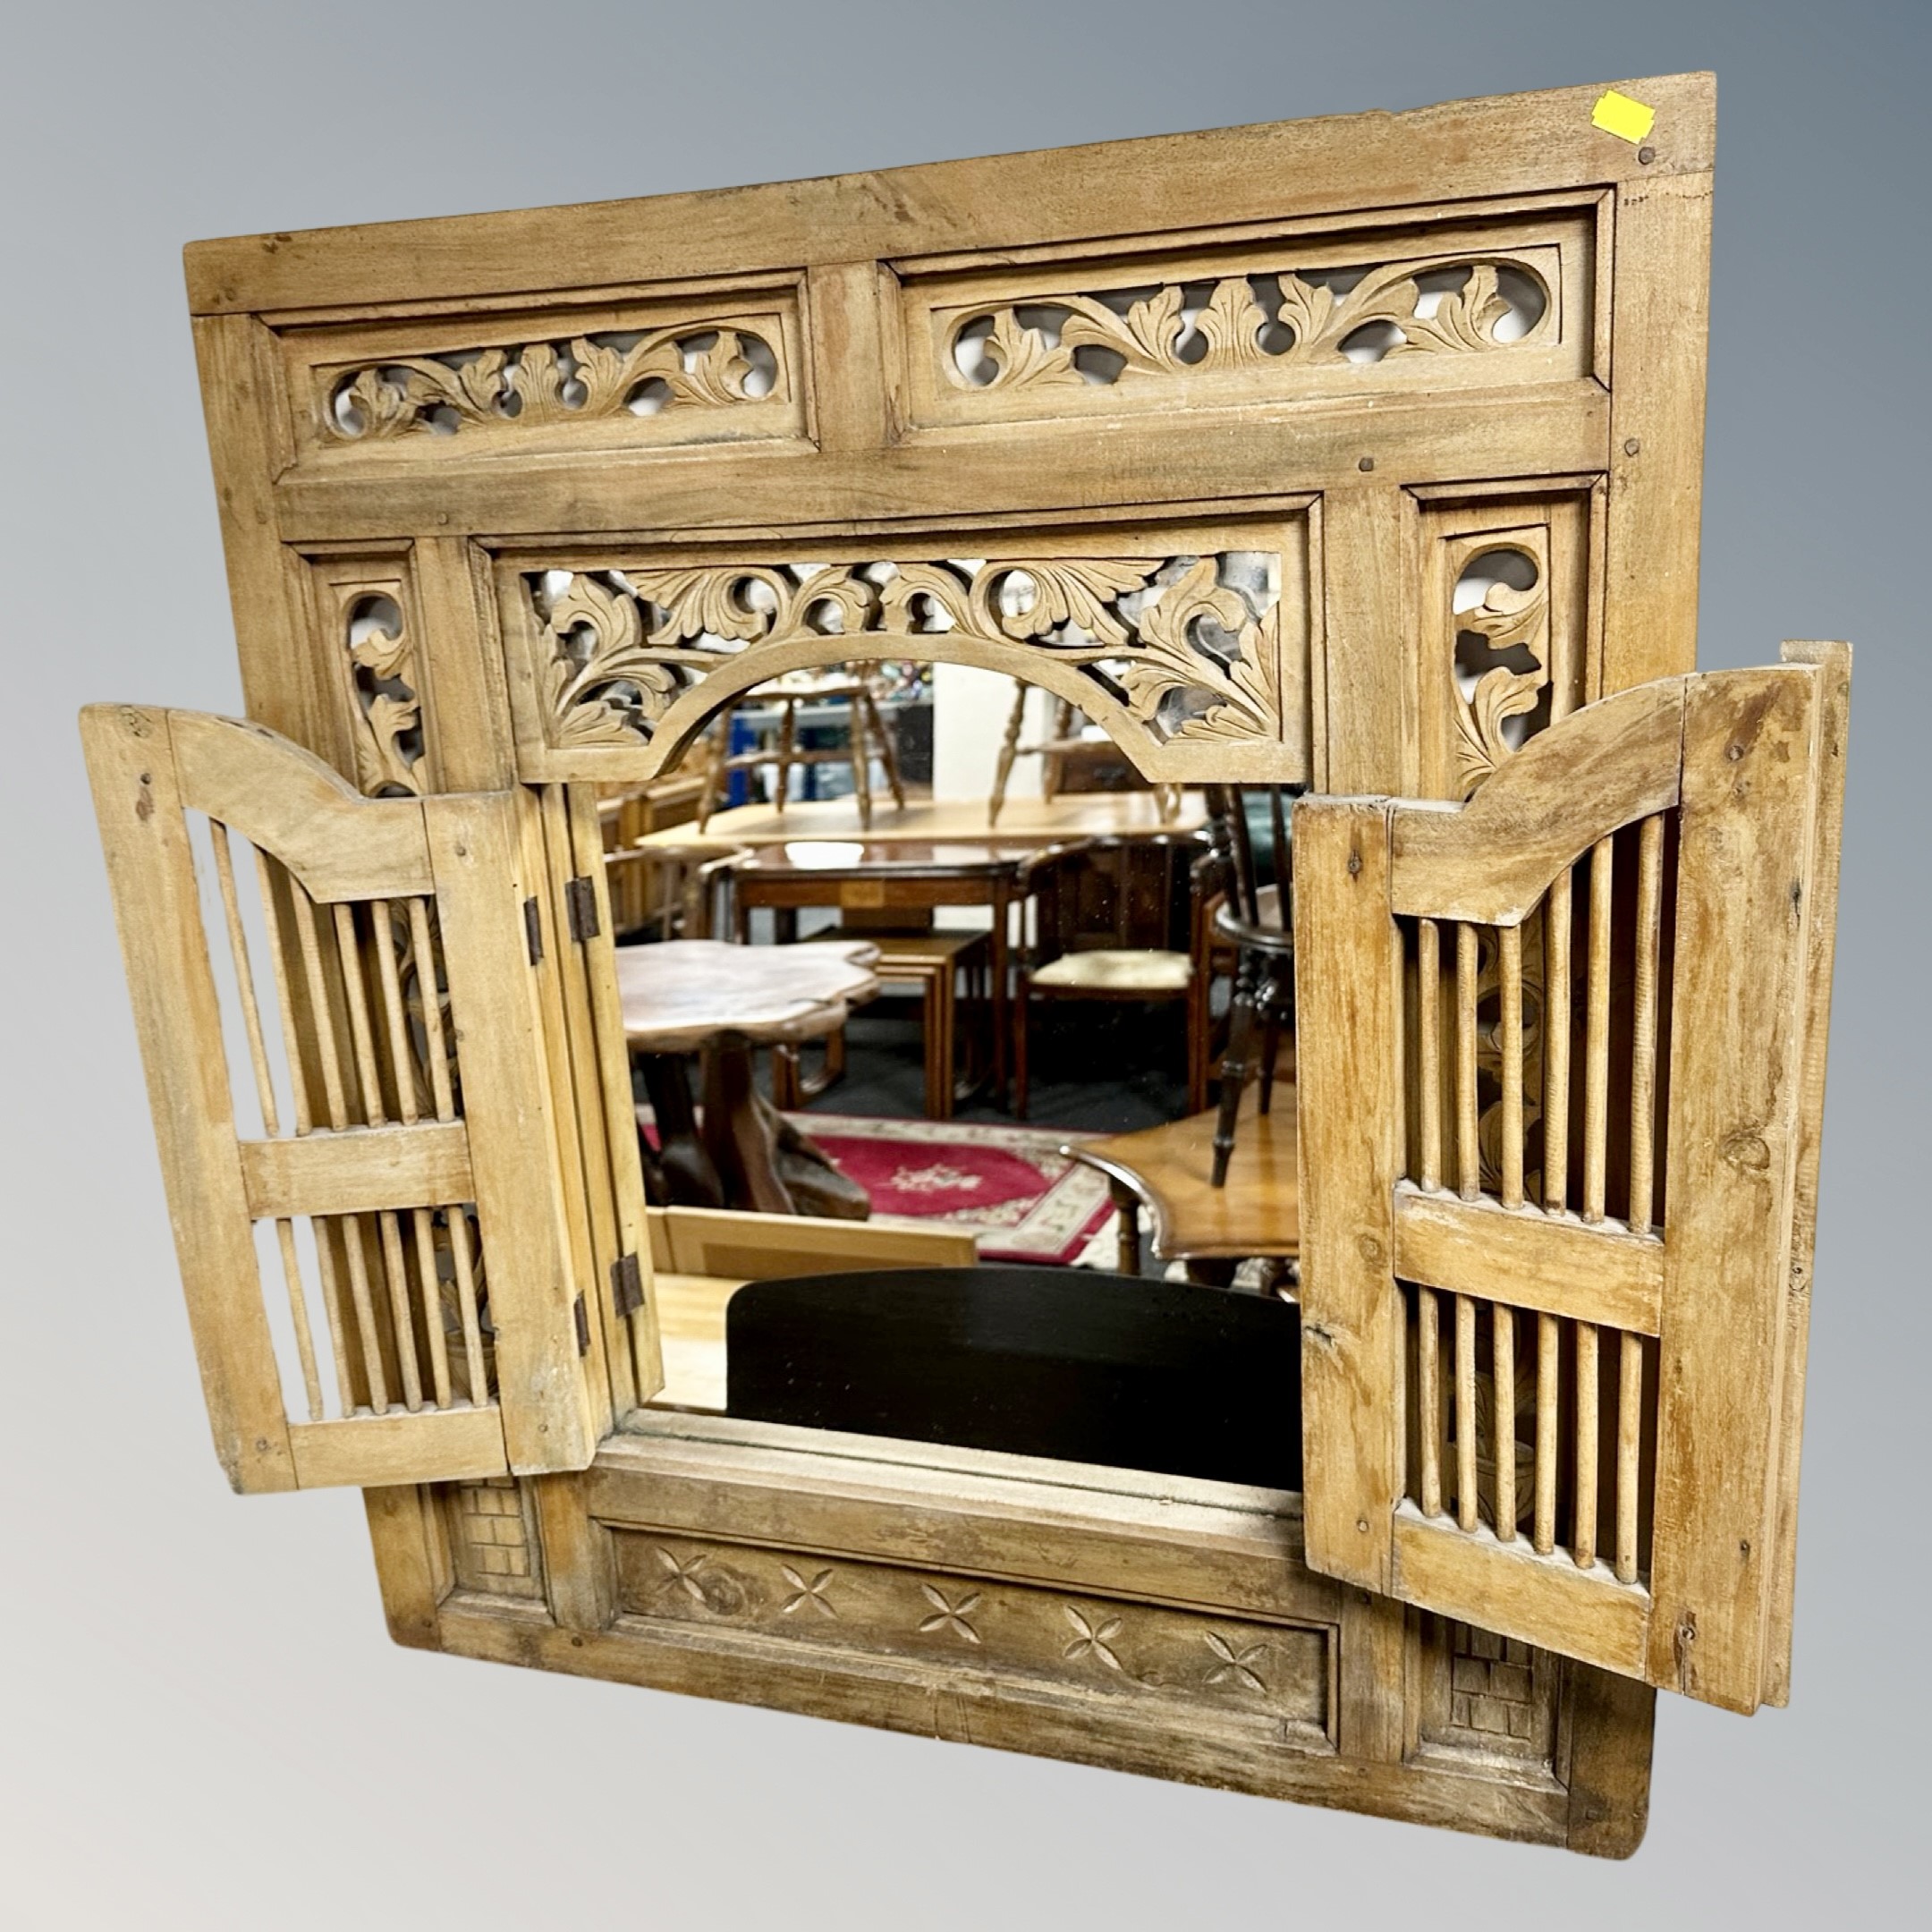 A carved Eastern mirror with shutter doors,